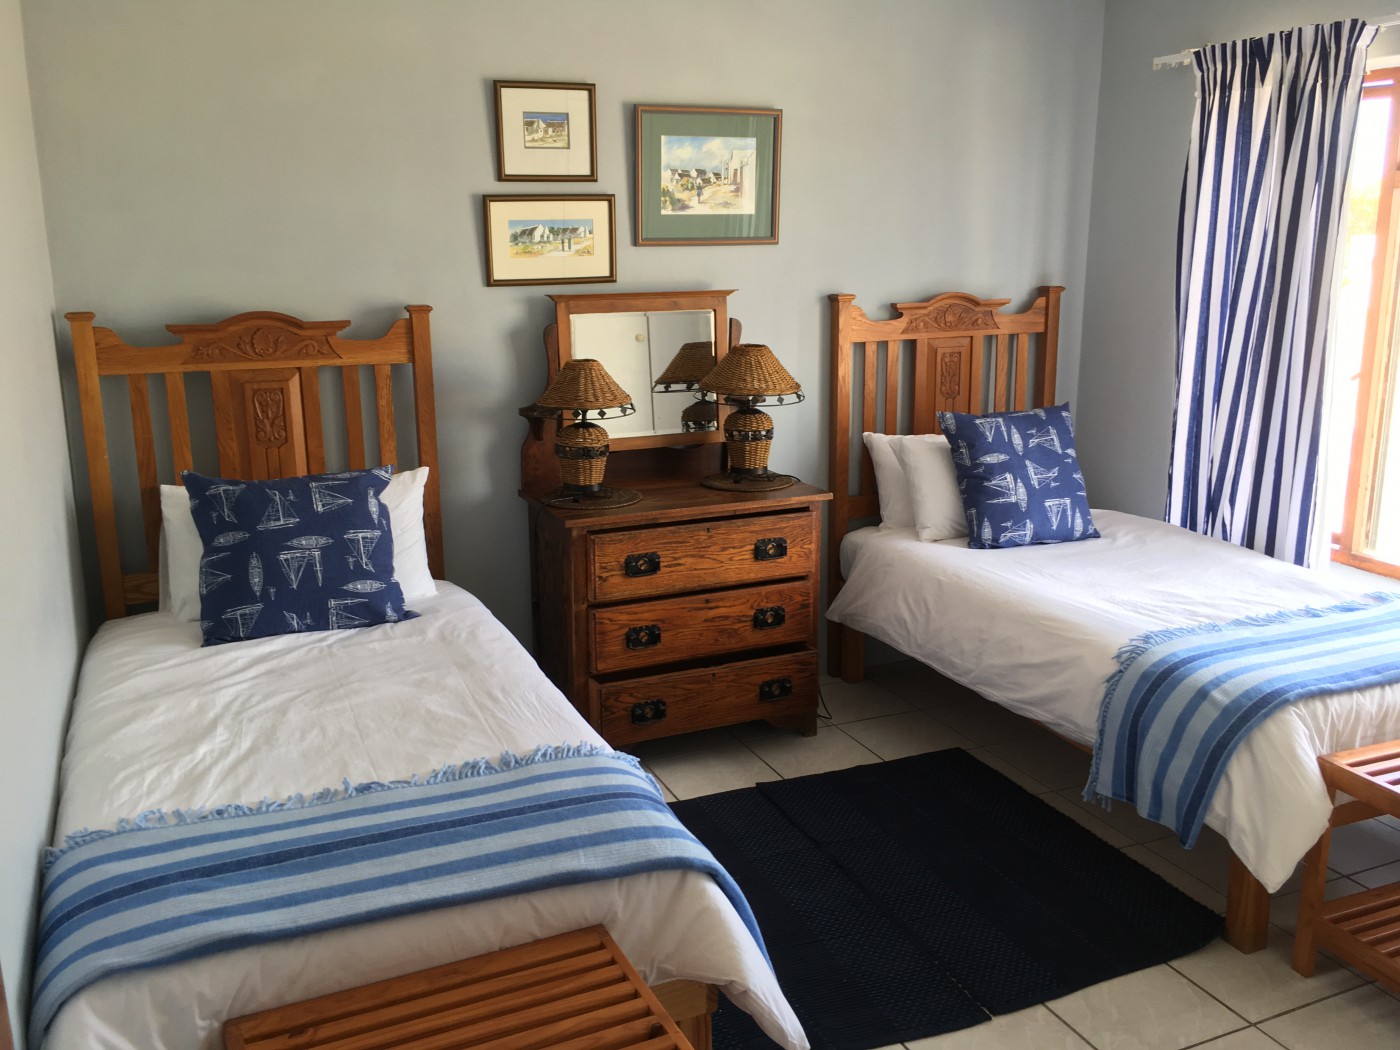 Holiday Accommodation to rent in Struisbaai, Overberg District, South Africa